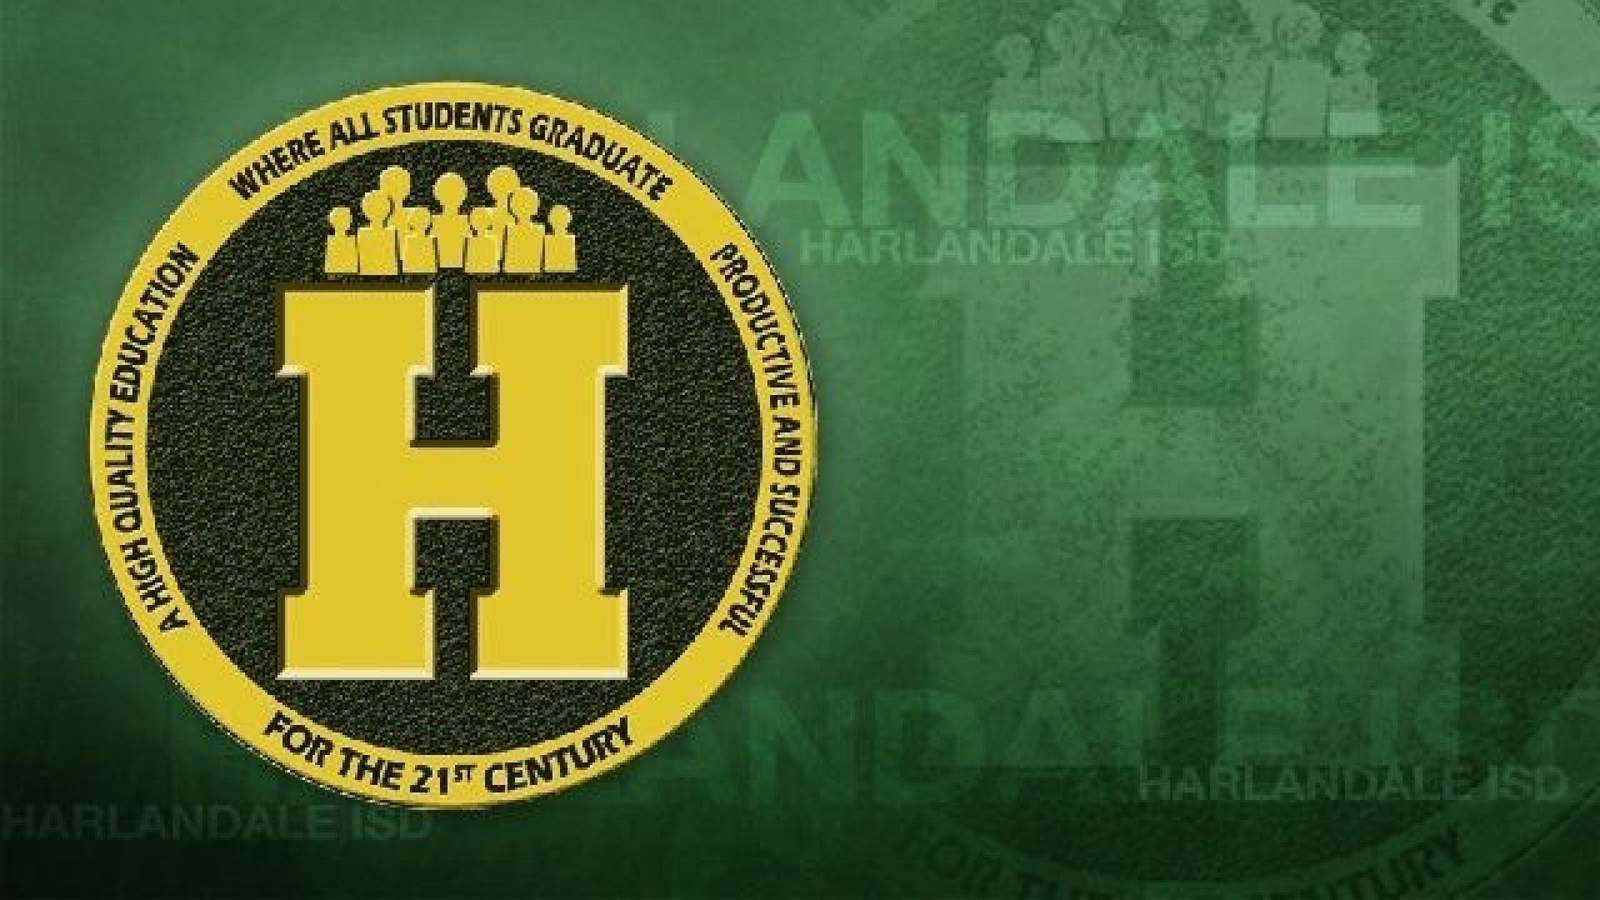 Harlandale ISD changes course on MLK holiday, adds extra school day instead